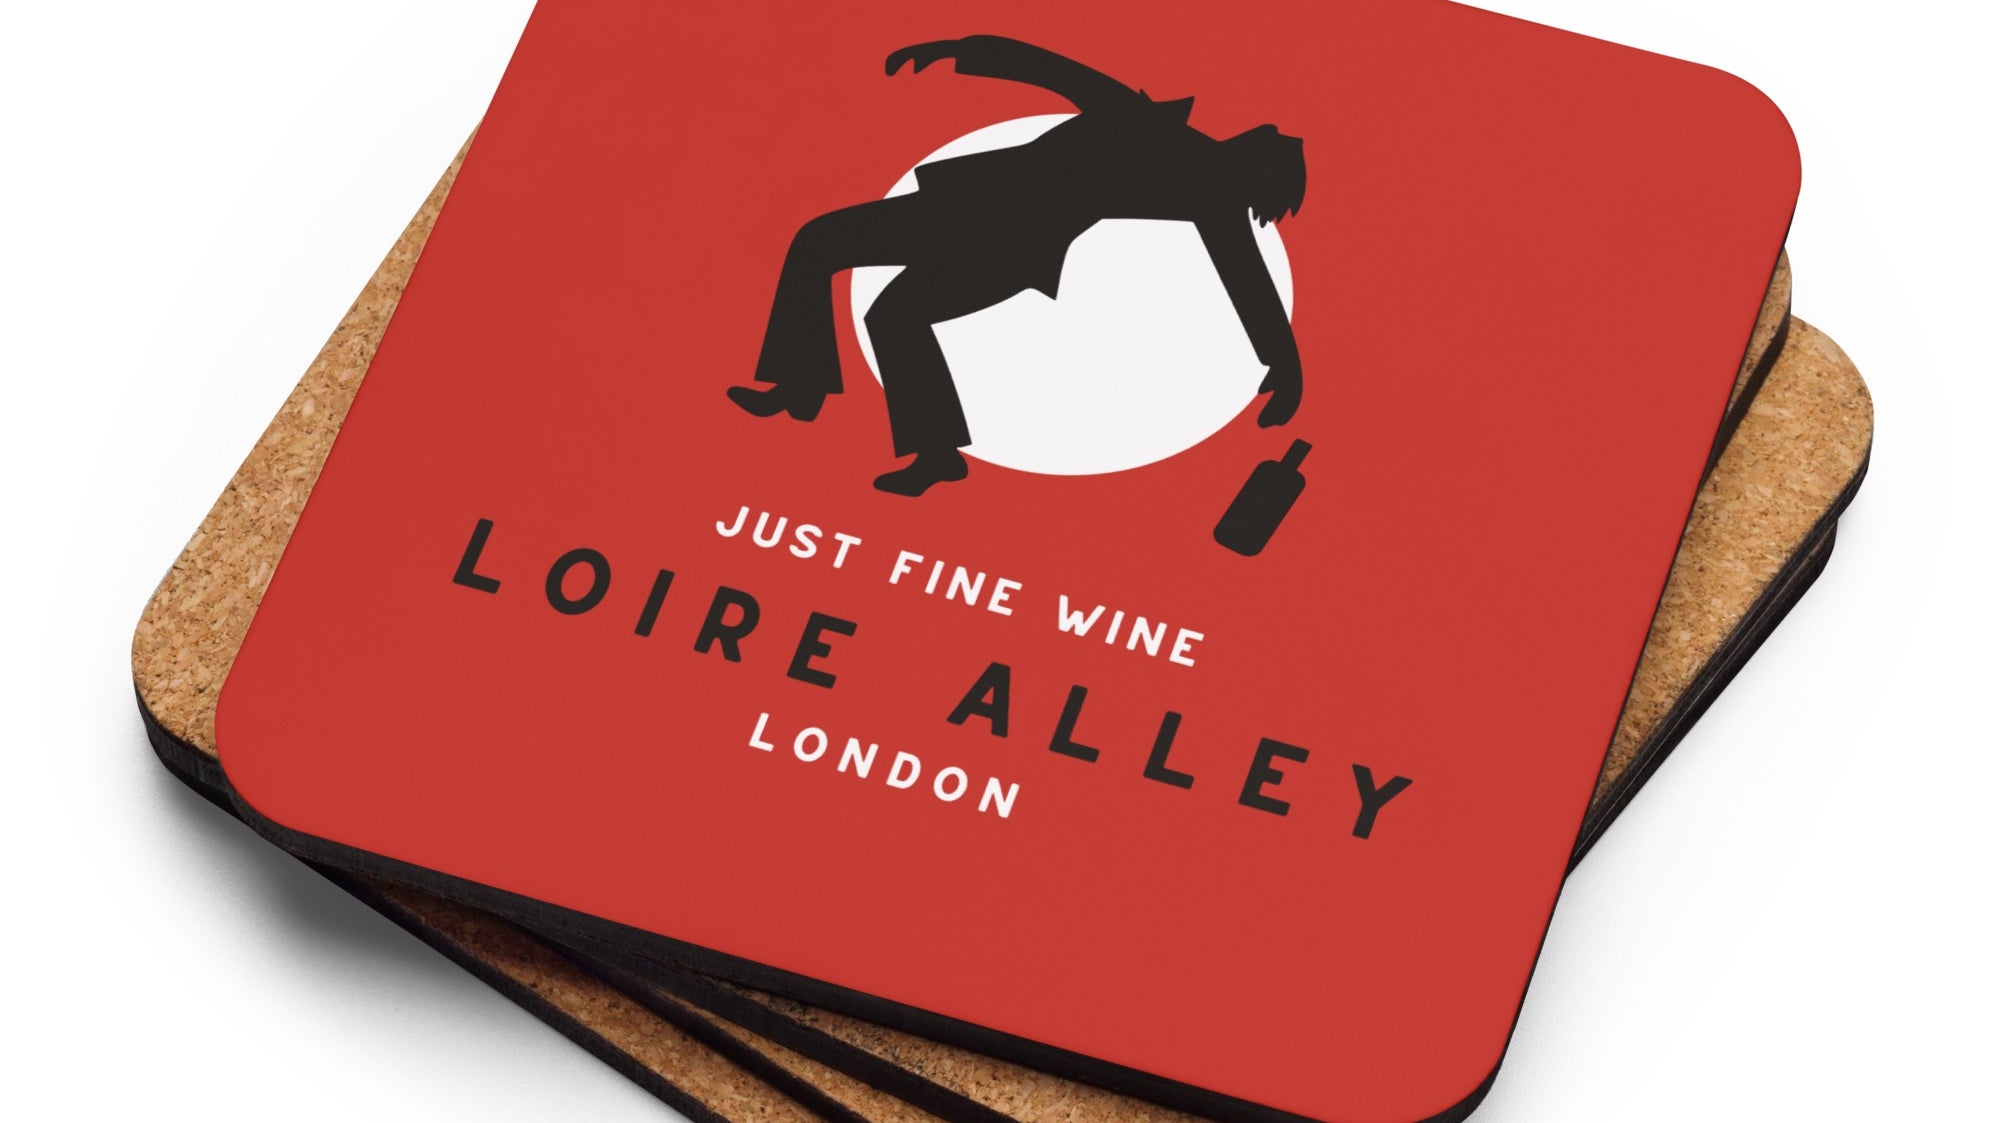 Loire Alley London coasters and gifts